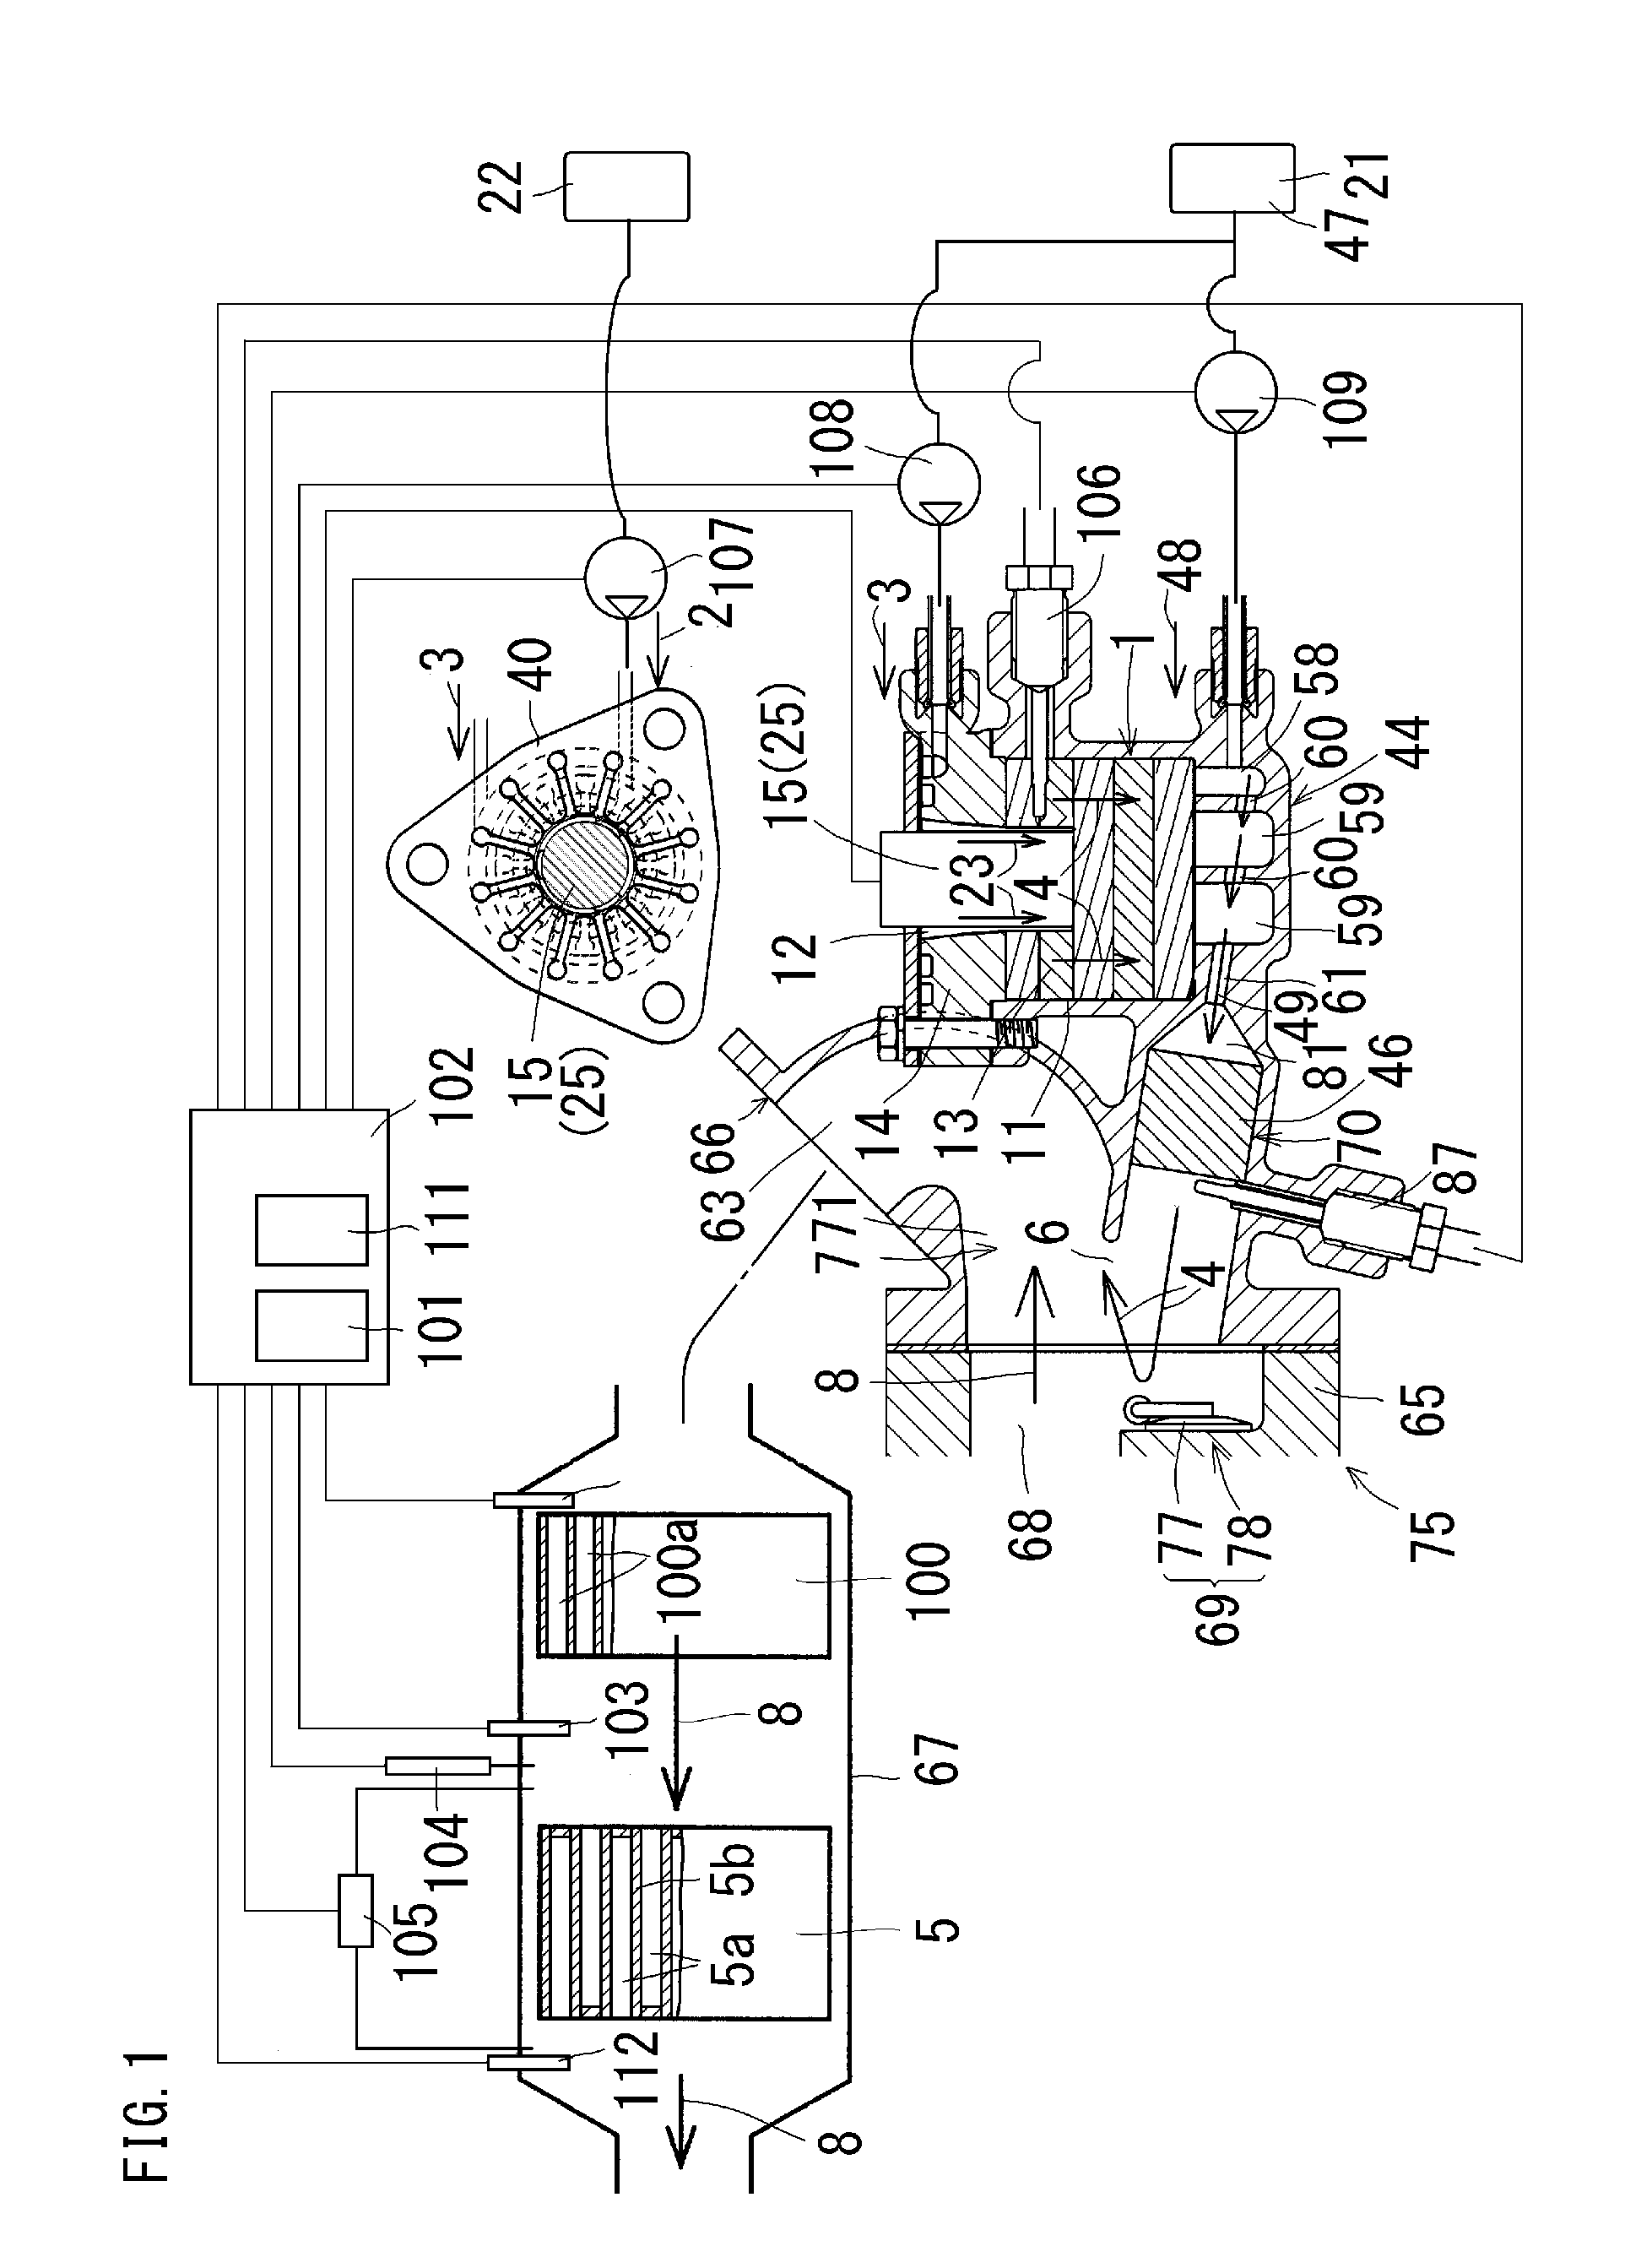 Exhaust gas treatment device for diesel engine